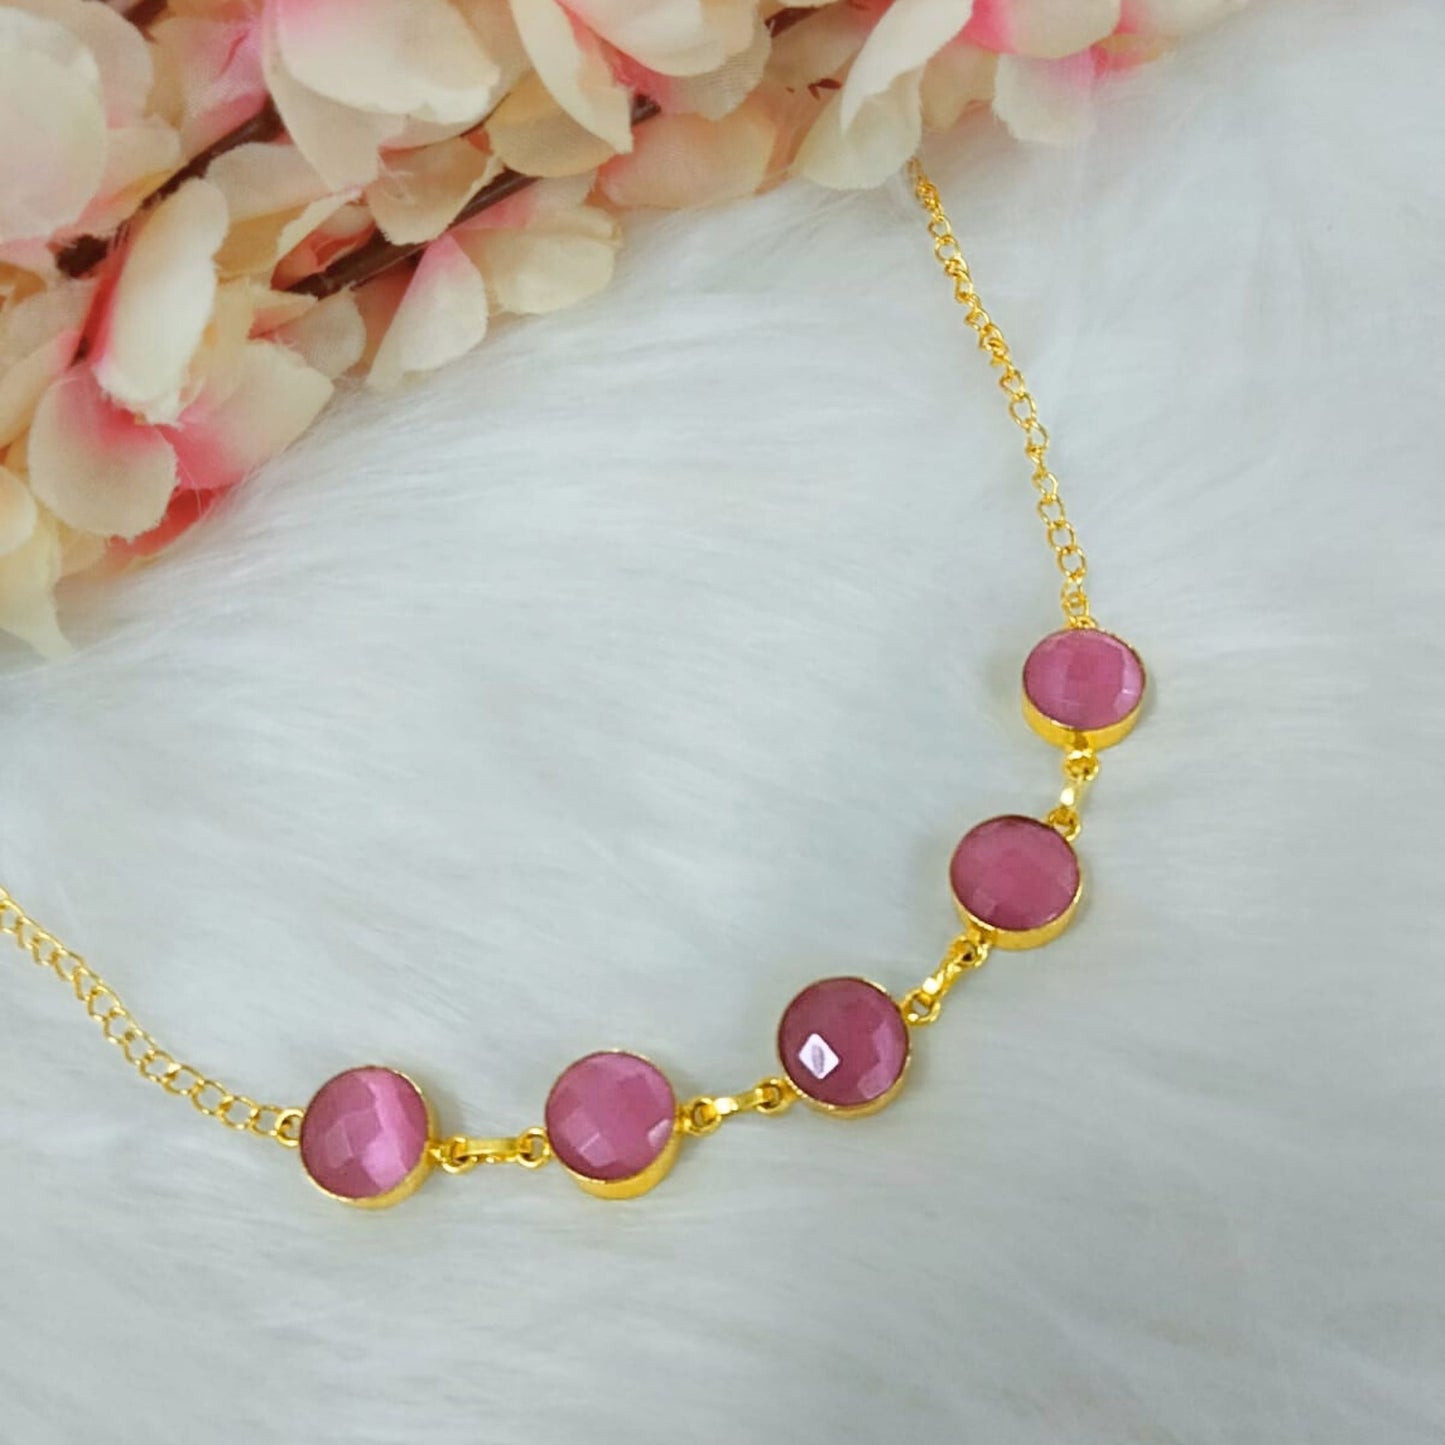 Bdiva 18K Gold Plated Five Stone Pink Ruby Necklace.